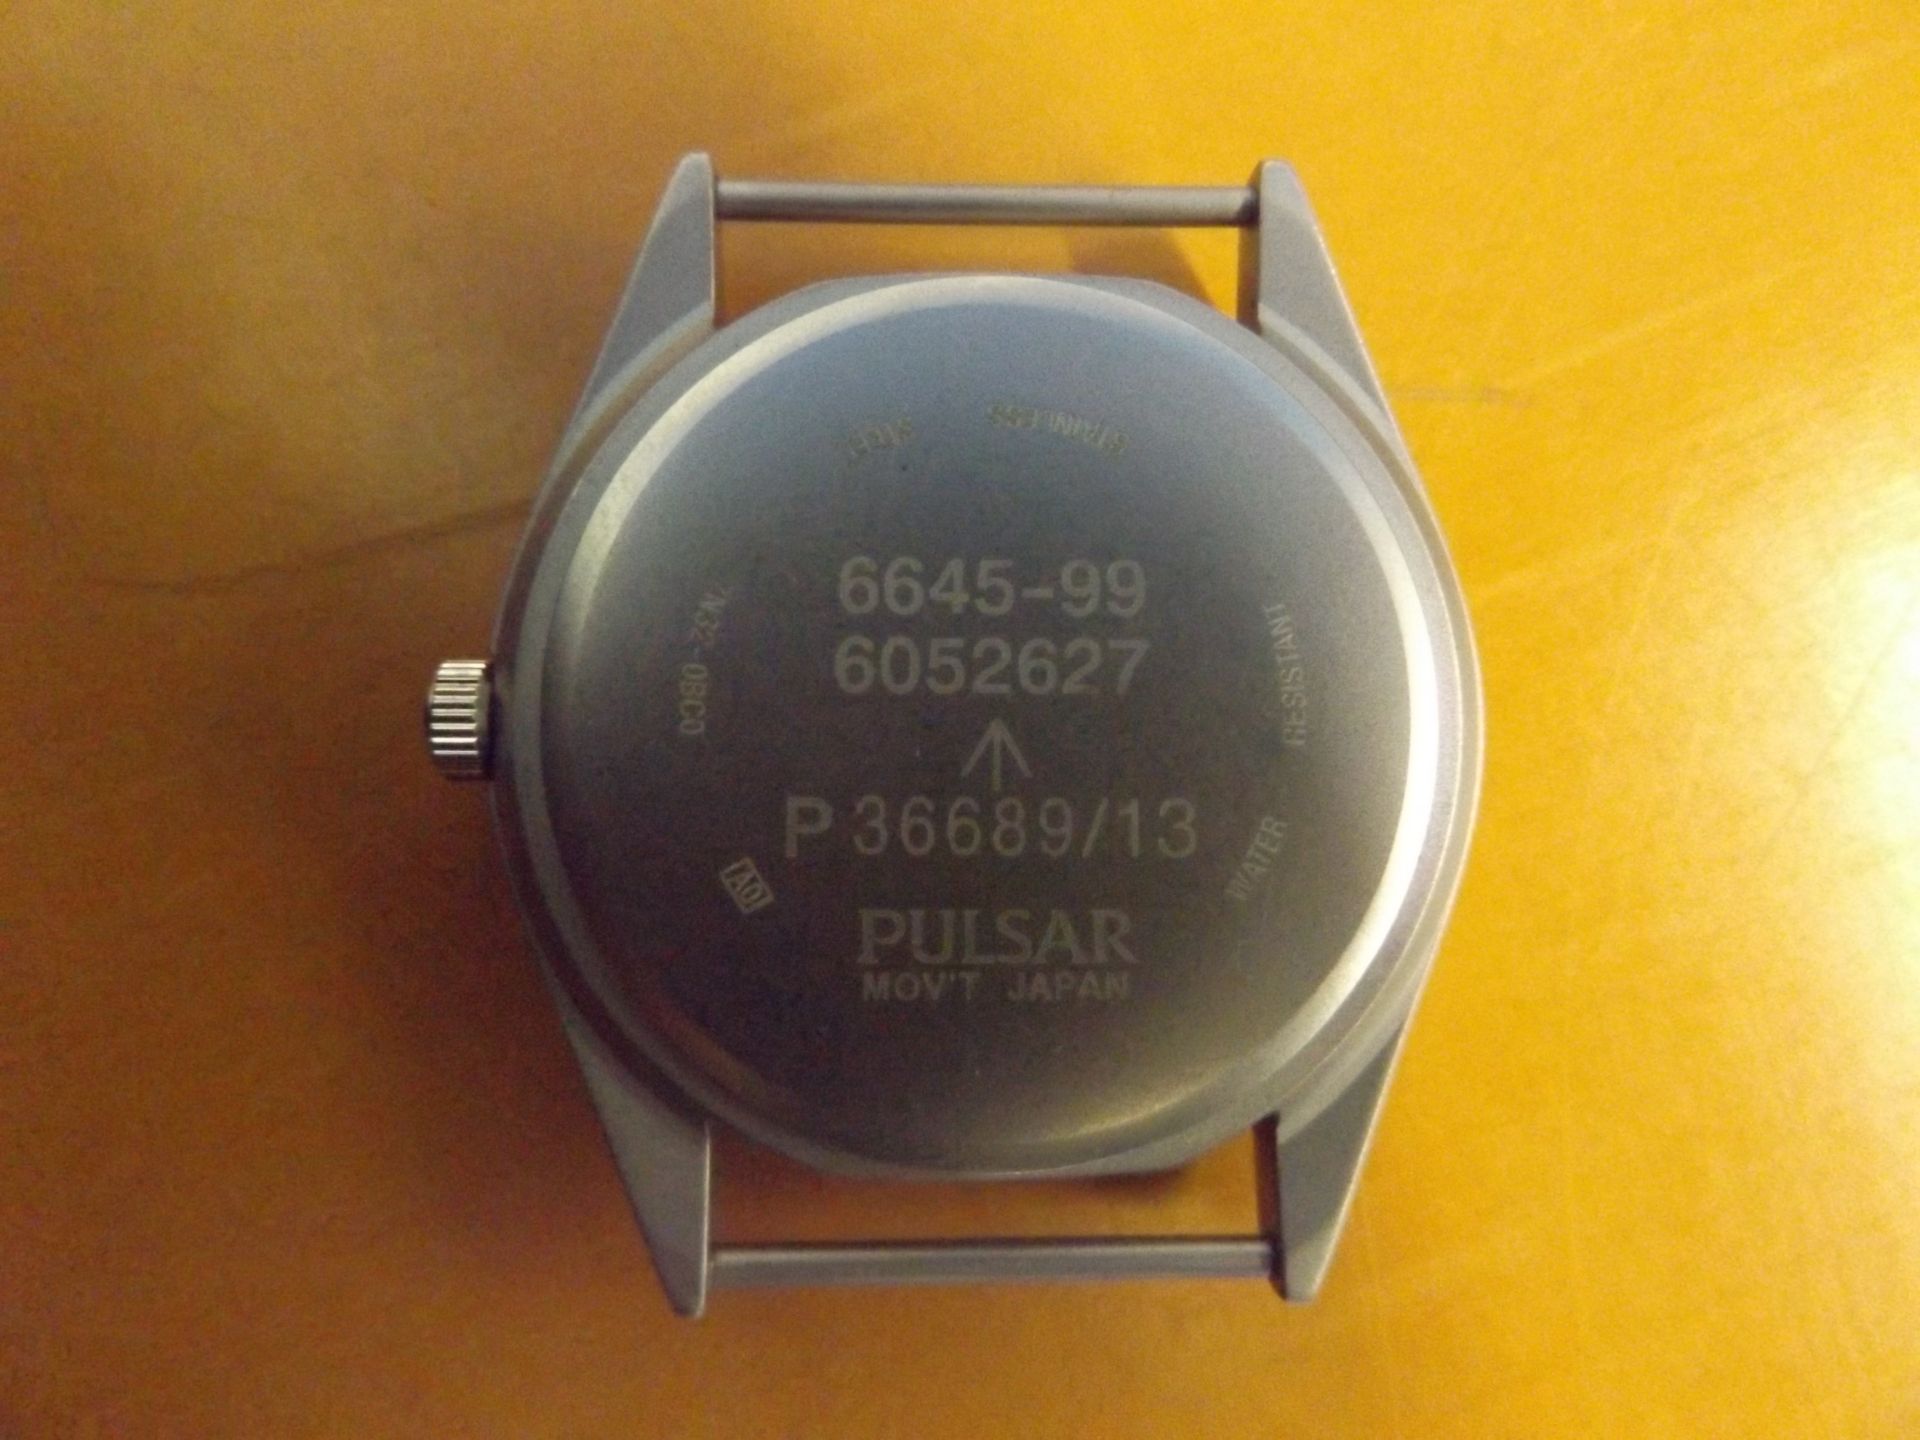 Unissued Pulsar G10 wrist watch - Afghan Issue - Image 6 of 7